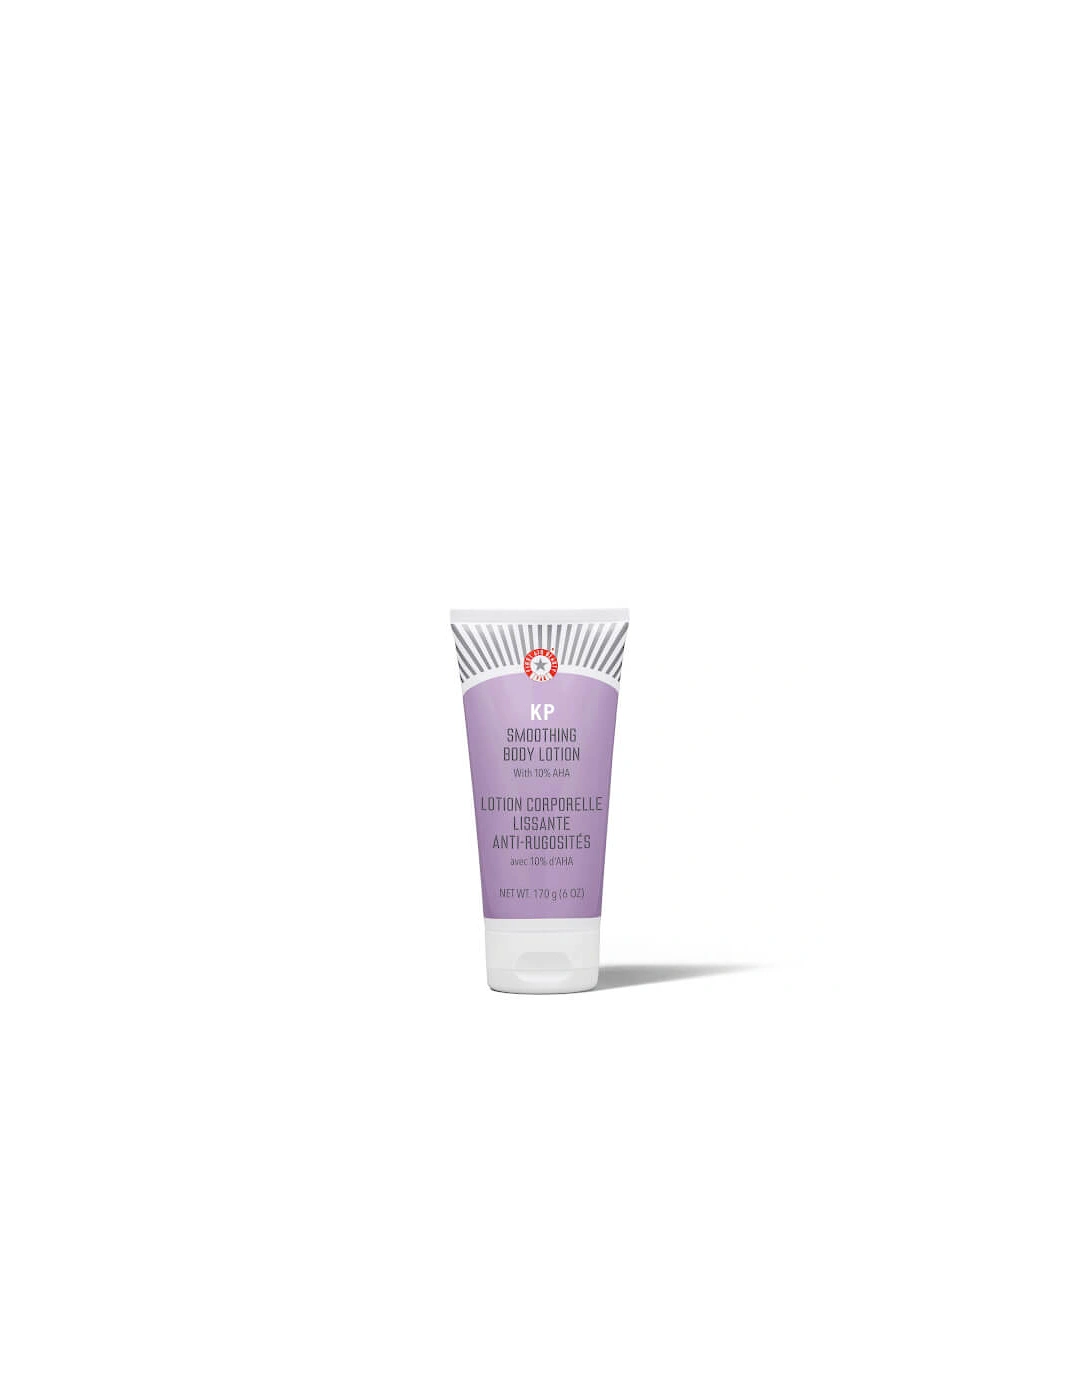 KP Smoothing Body Lotion with 10% AHA 170g, 2 of 1